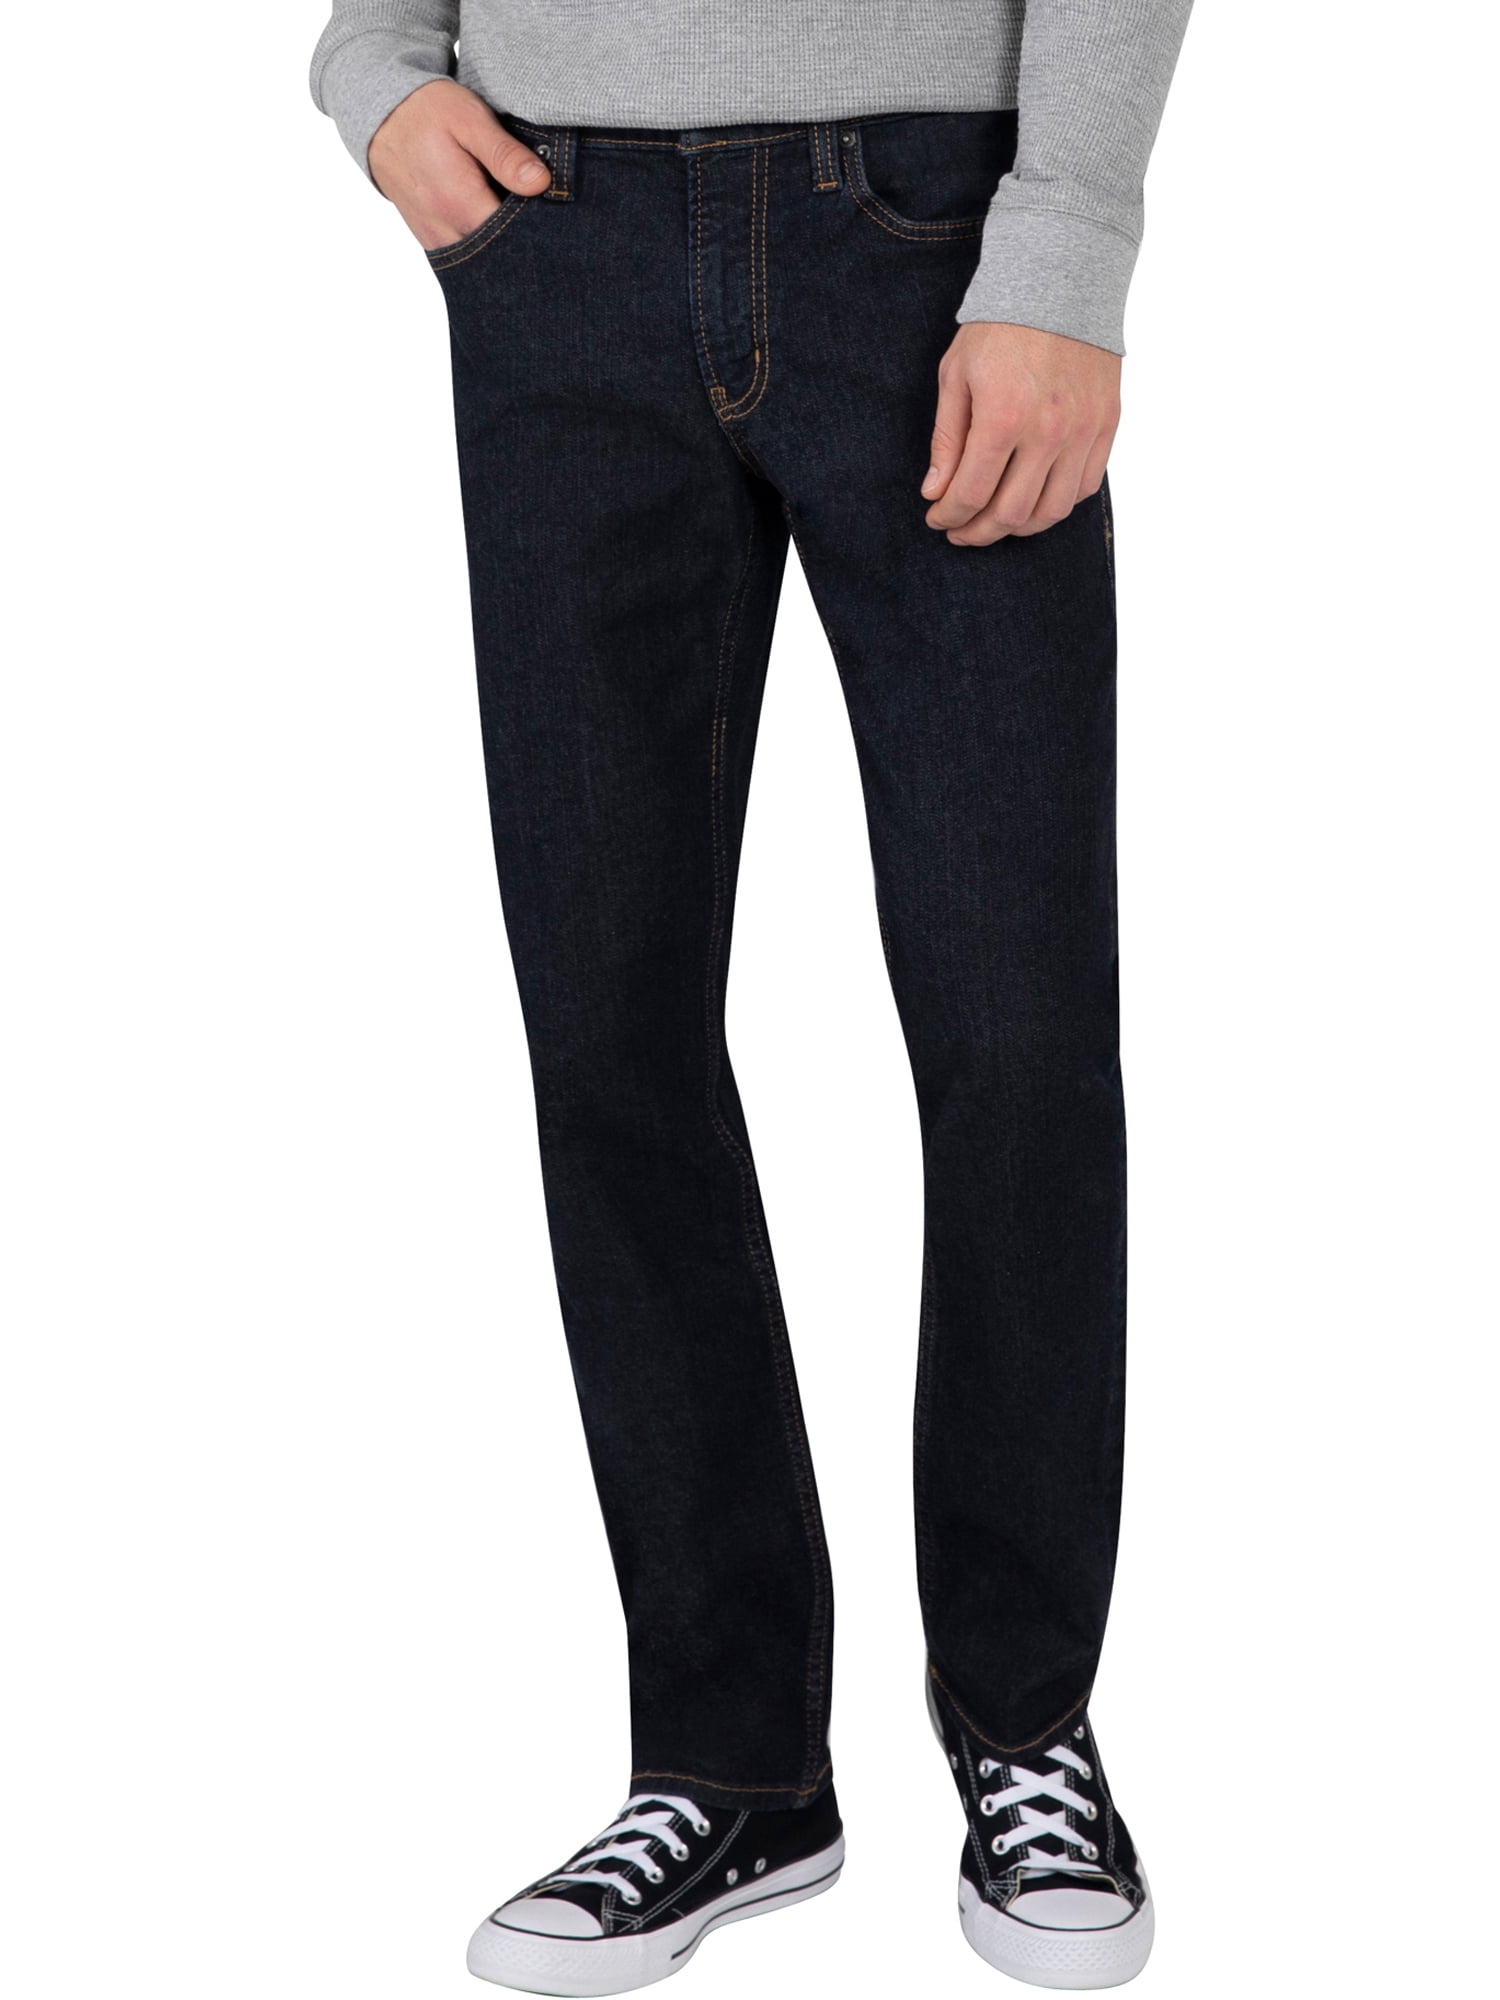 Authentic by Silver Jeans Co. Men's Slim Fit Tapered Leg Jean, Waist ...